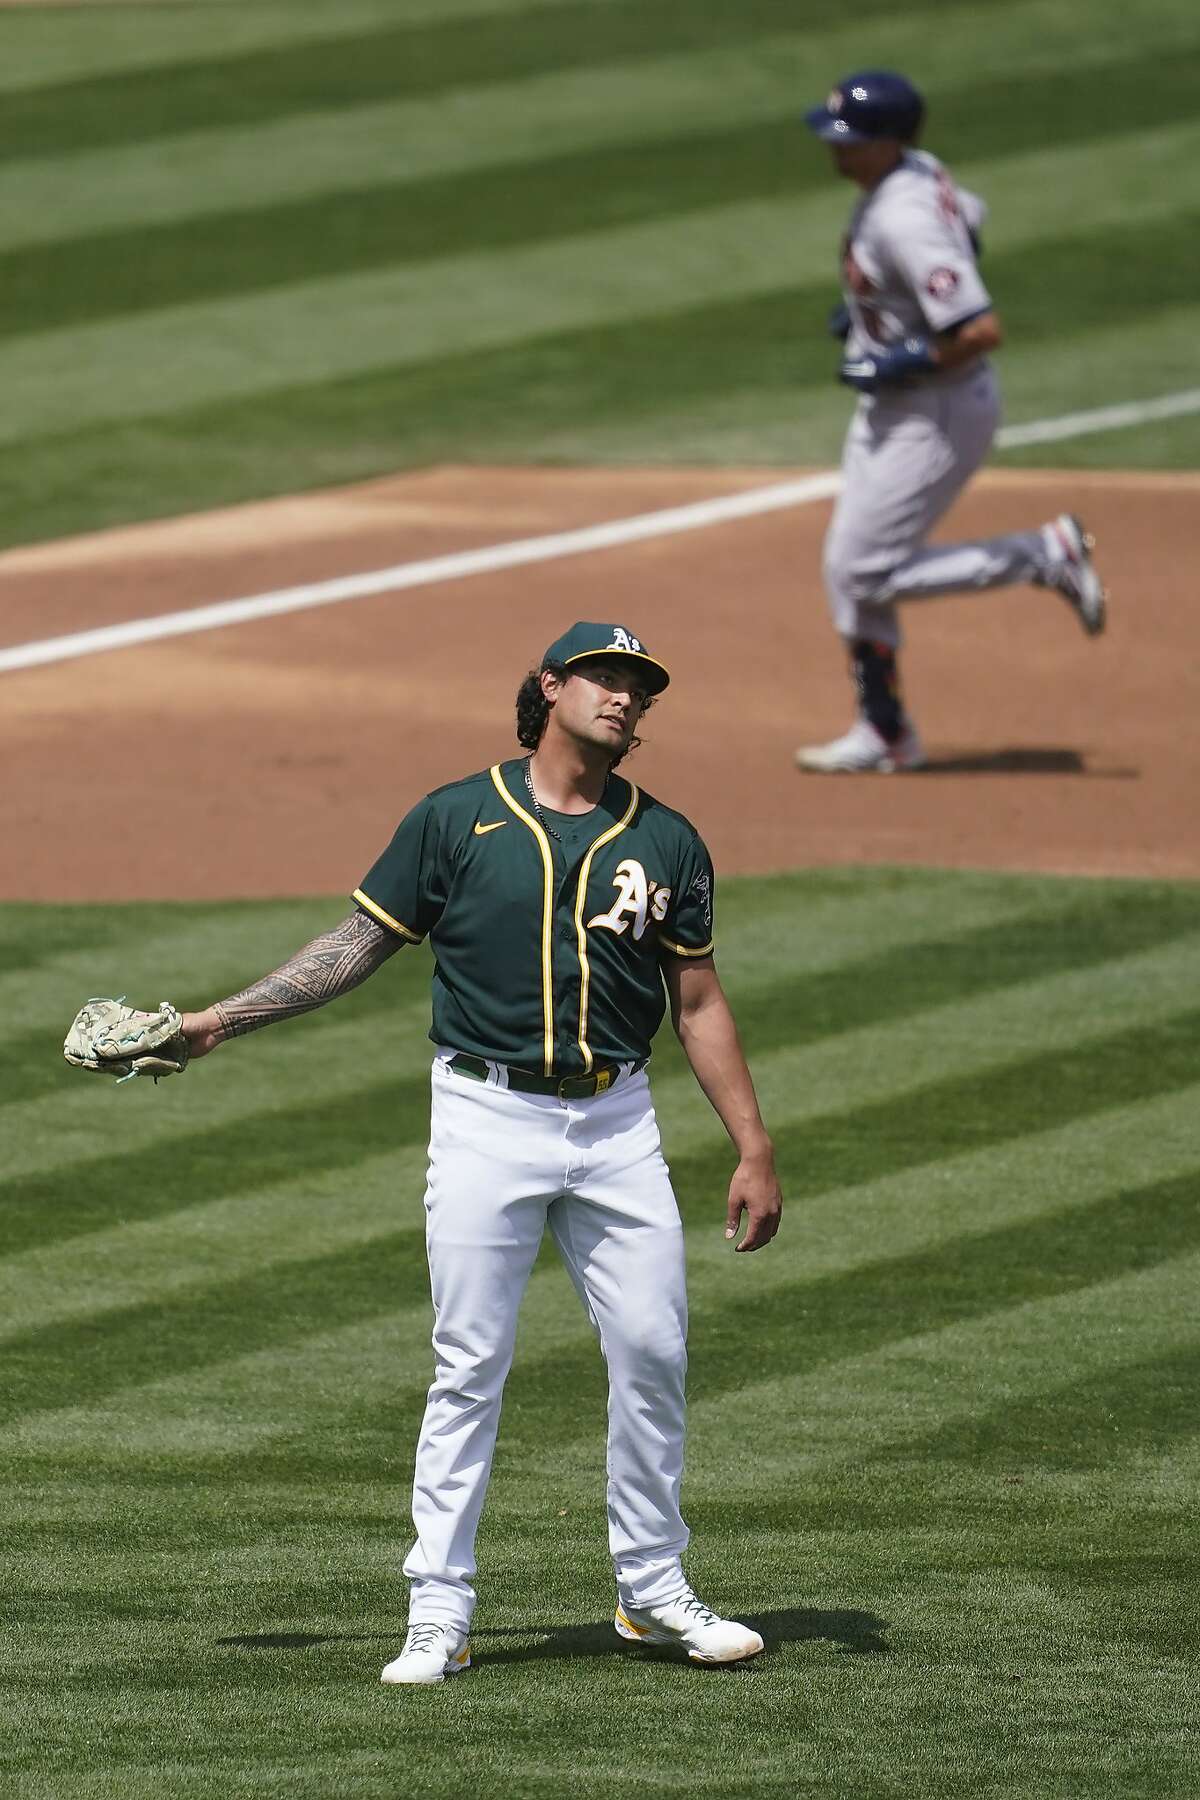 Houston Astros' Jason Castro, top, rounds the bases after hitting a two-run home run off Oakland Athletics pitcher Sean Manaea, bottom, during the second inning of a baseball game in Oakland, Calif., Sunday, April 4, 2021.